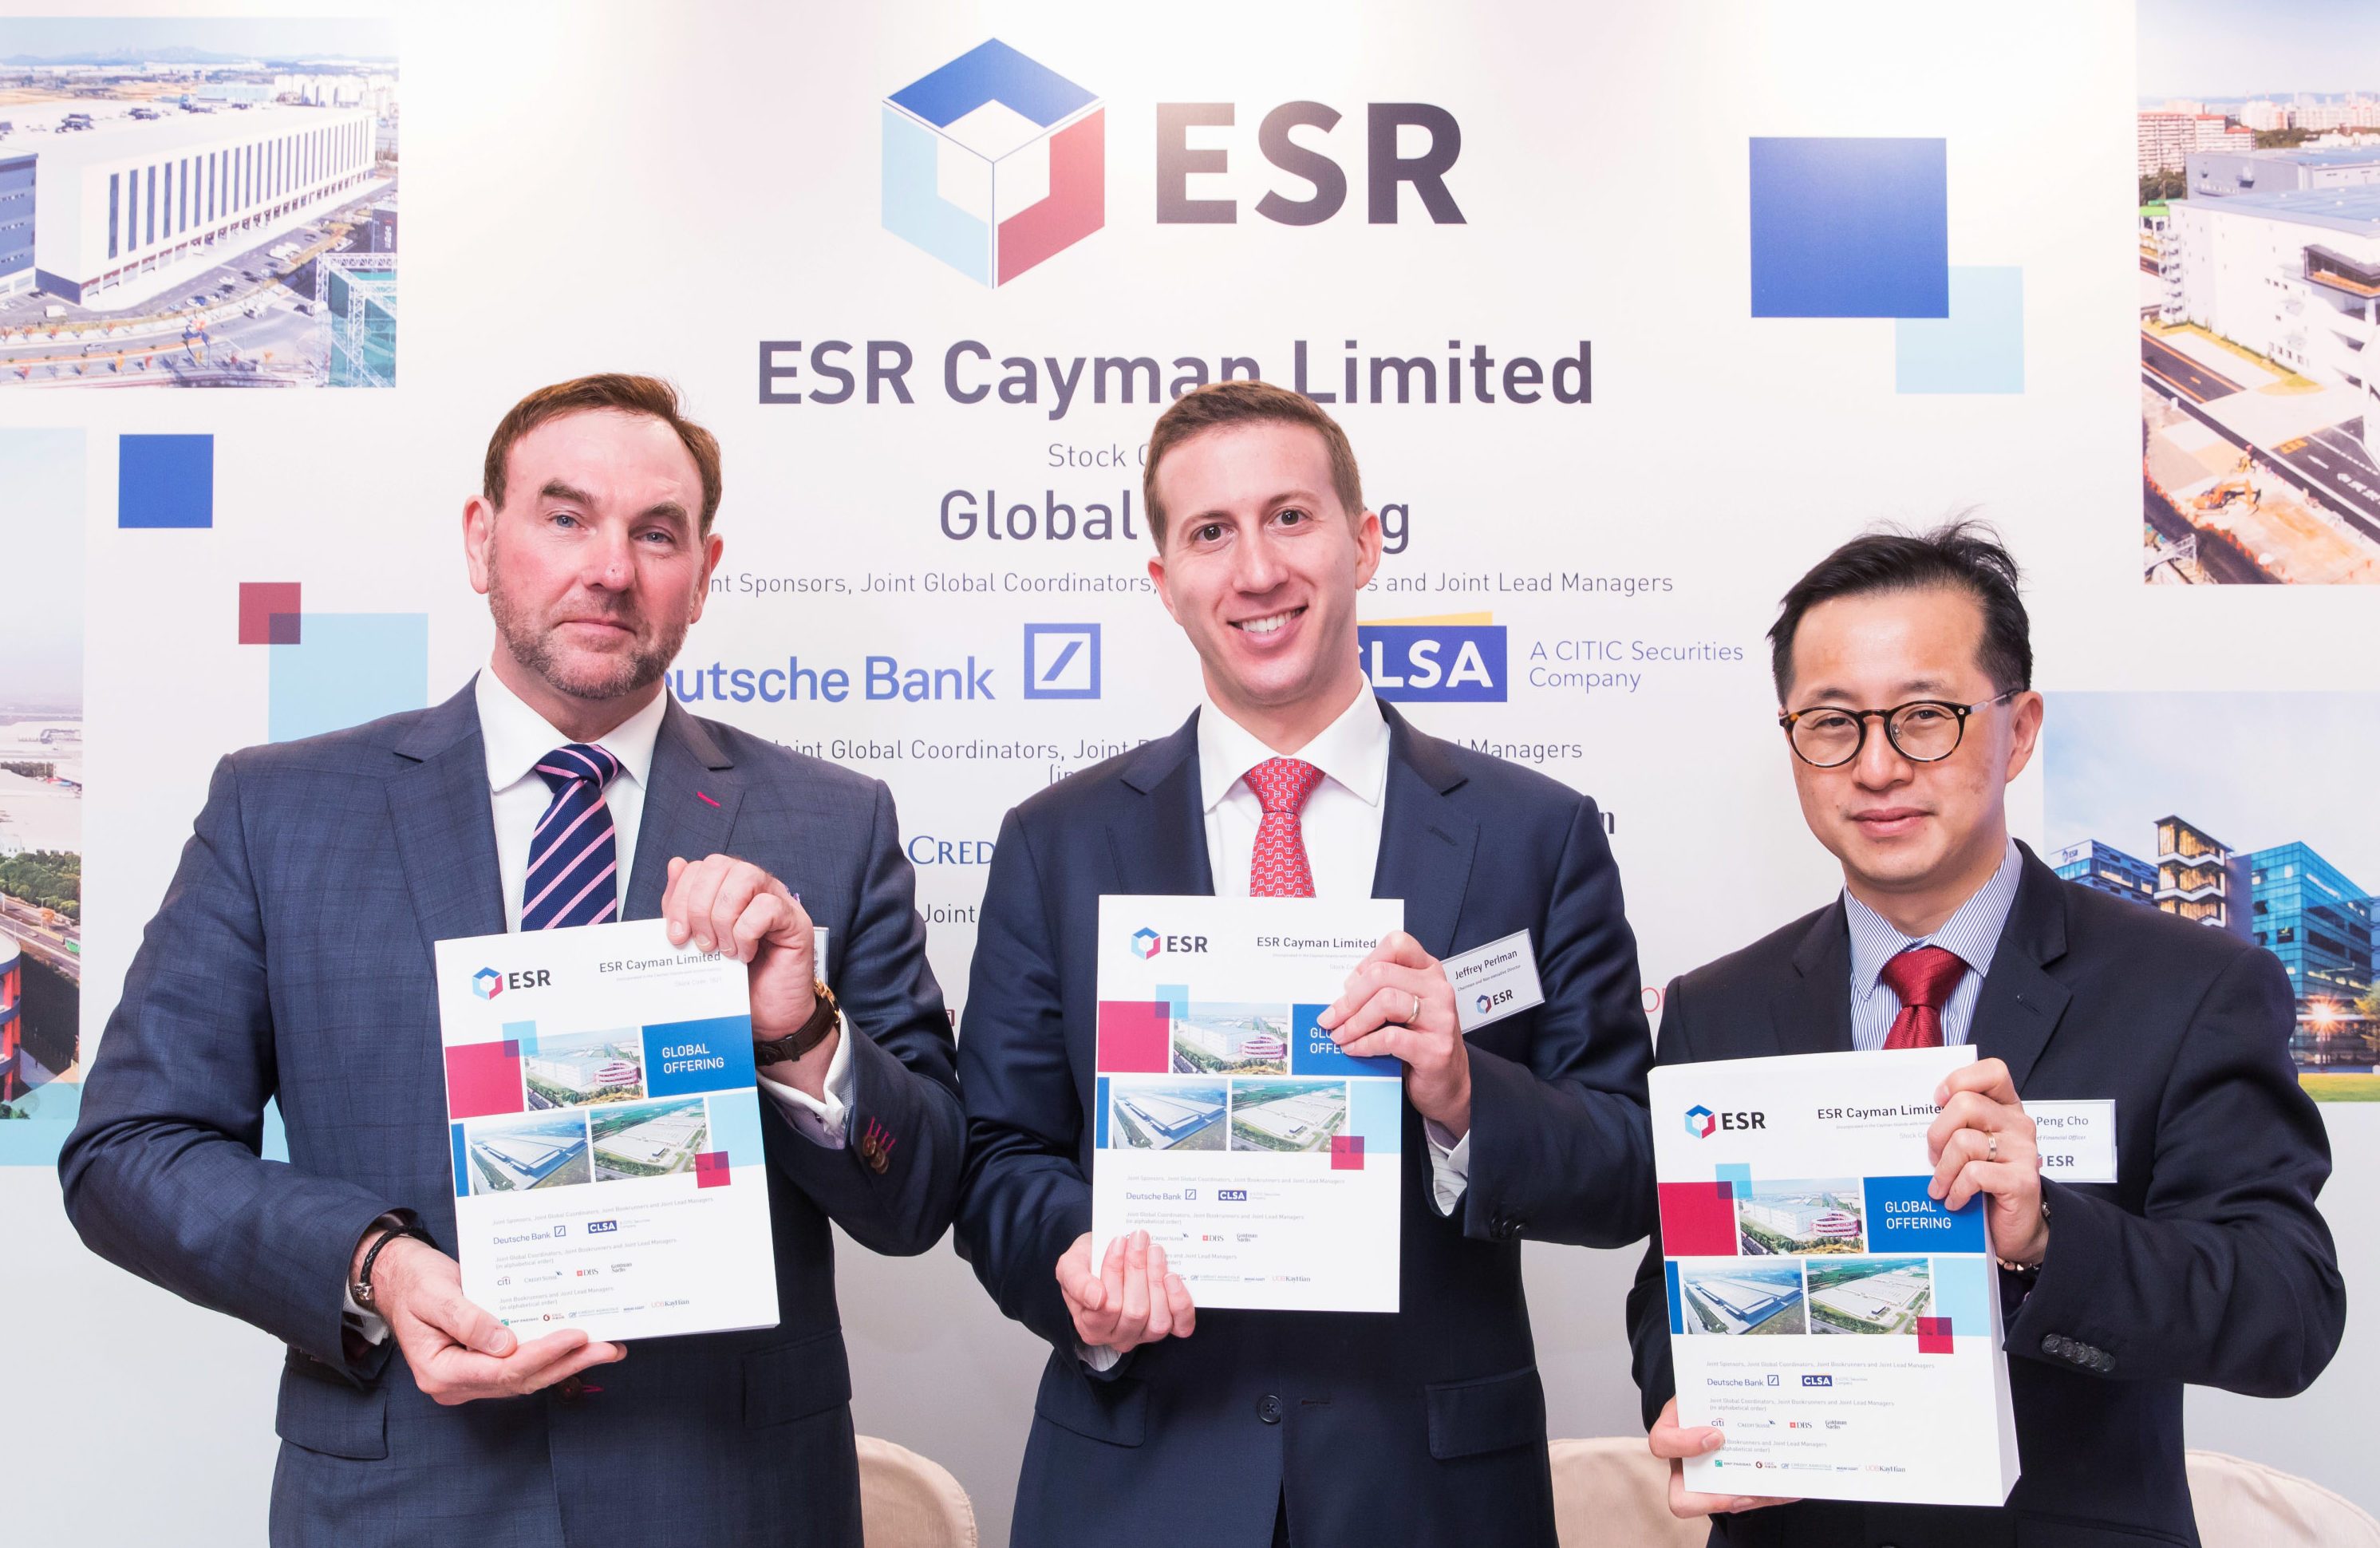 Warburg-backed ESR likely to raise $1.6b in Hong Kong IPO